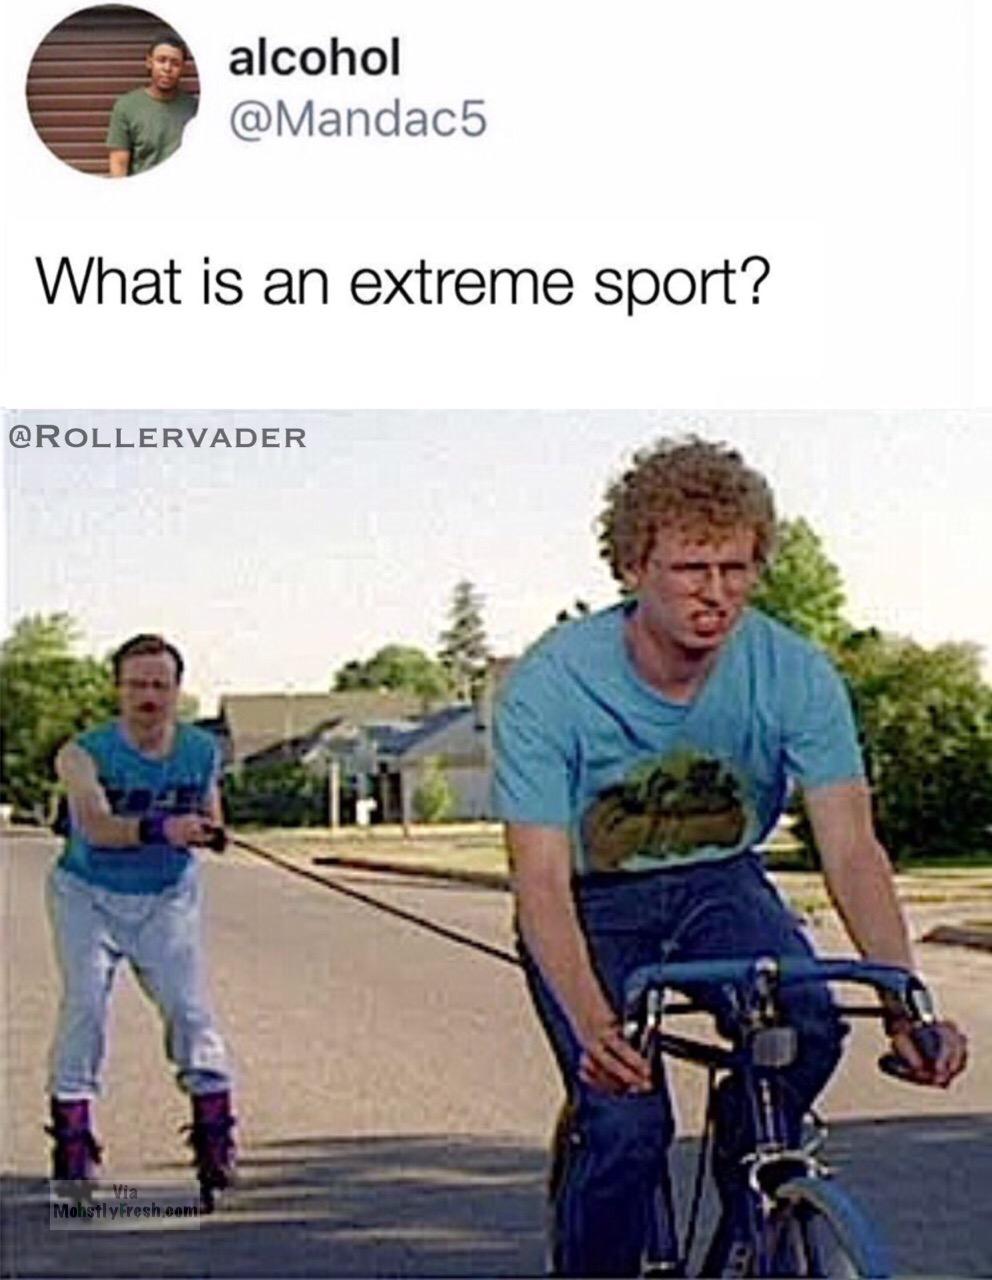 memes  - napoleon dynamite bike scene - alcohol What is an extreme sport? Mohstlyfresh.com